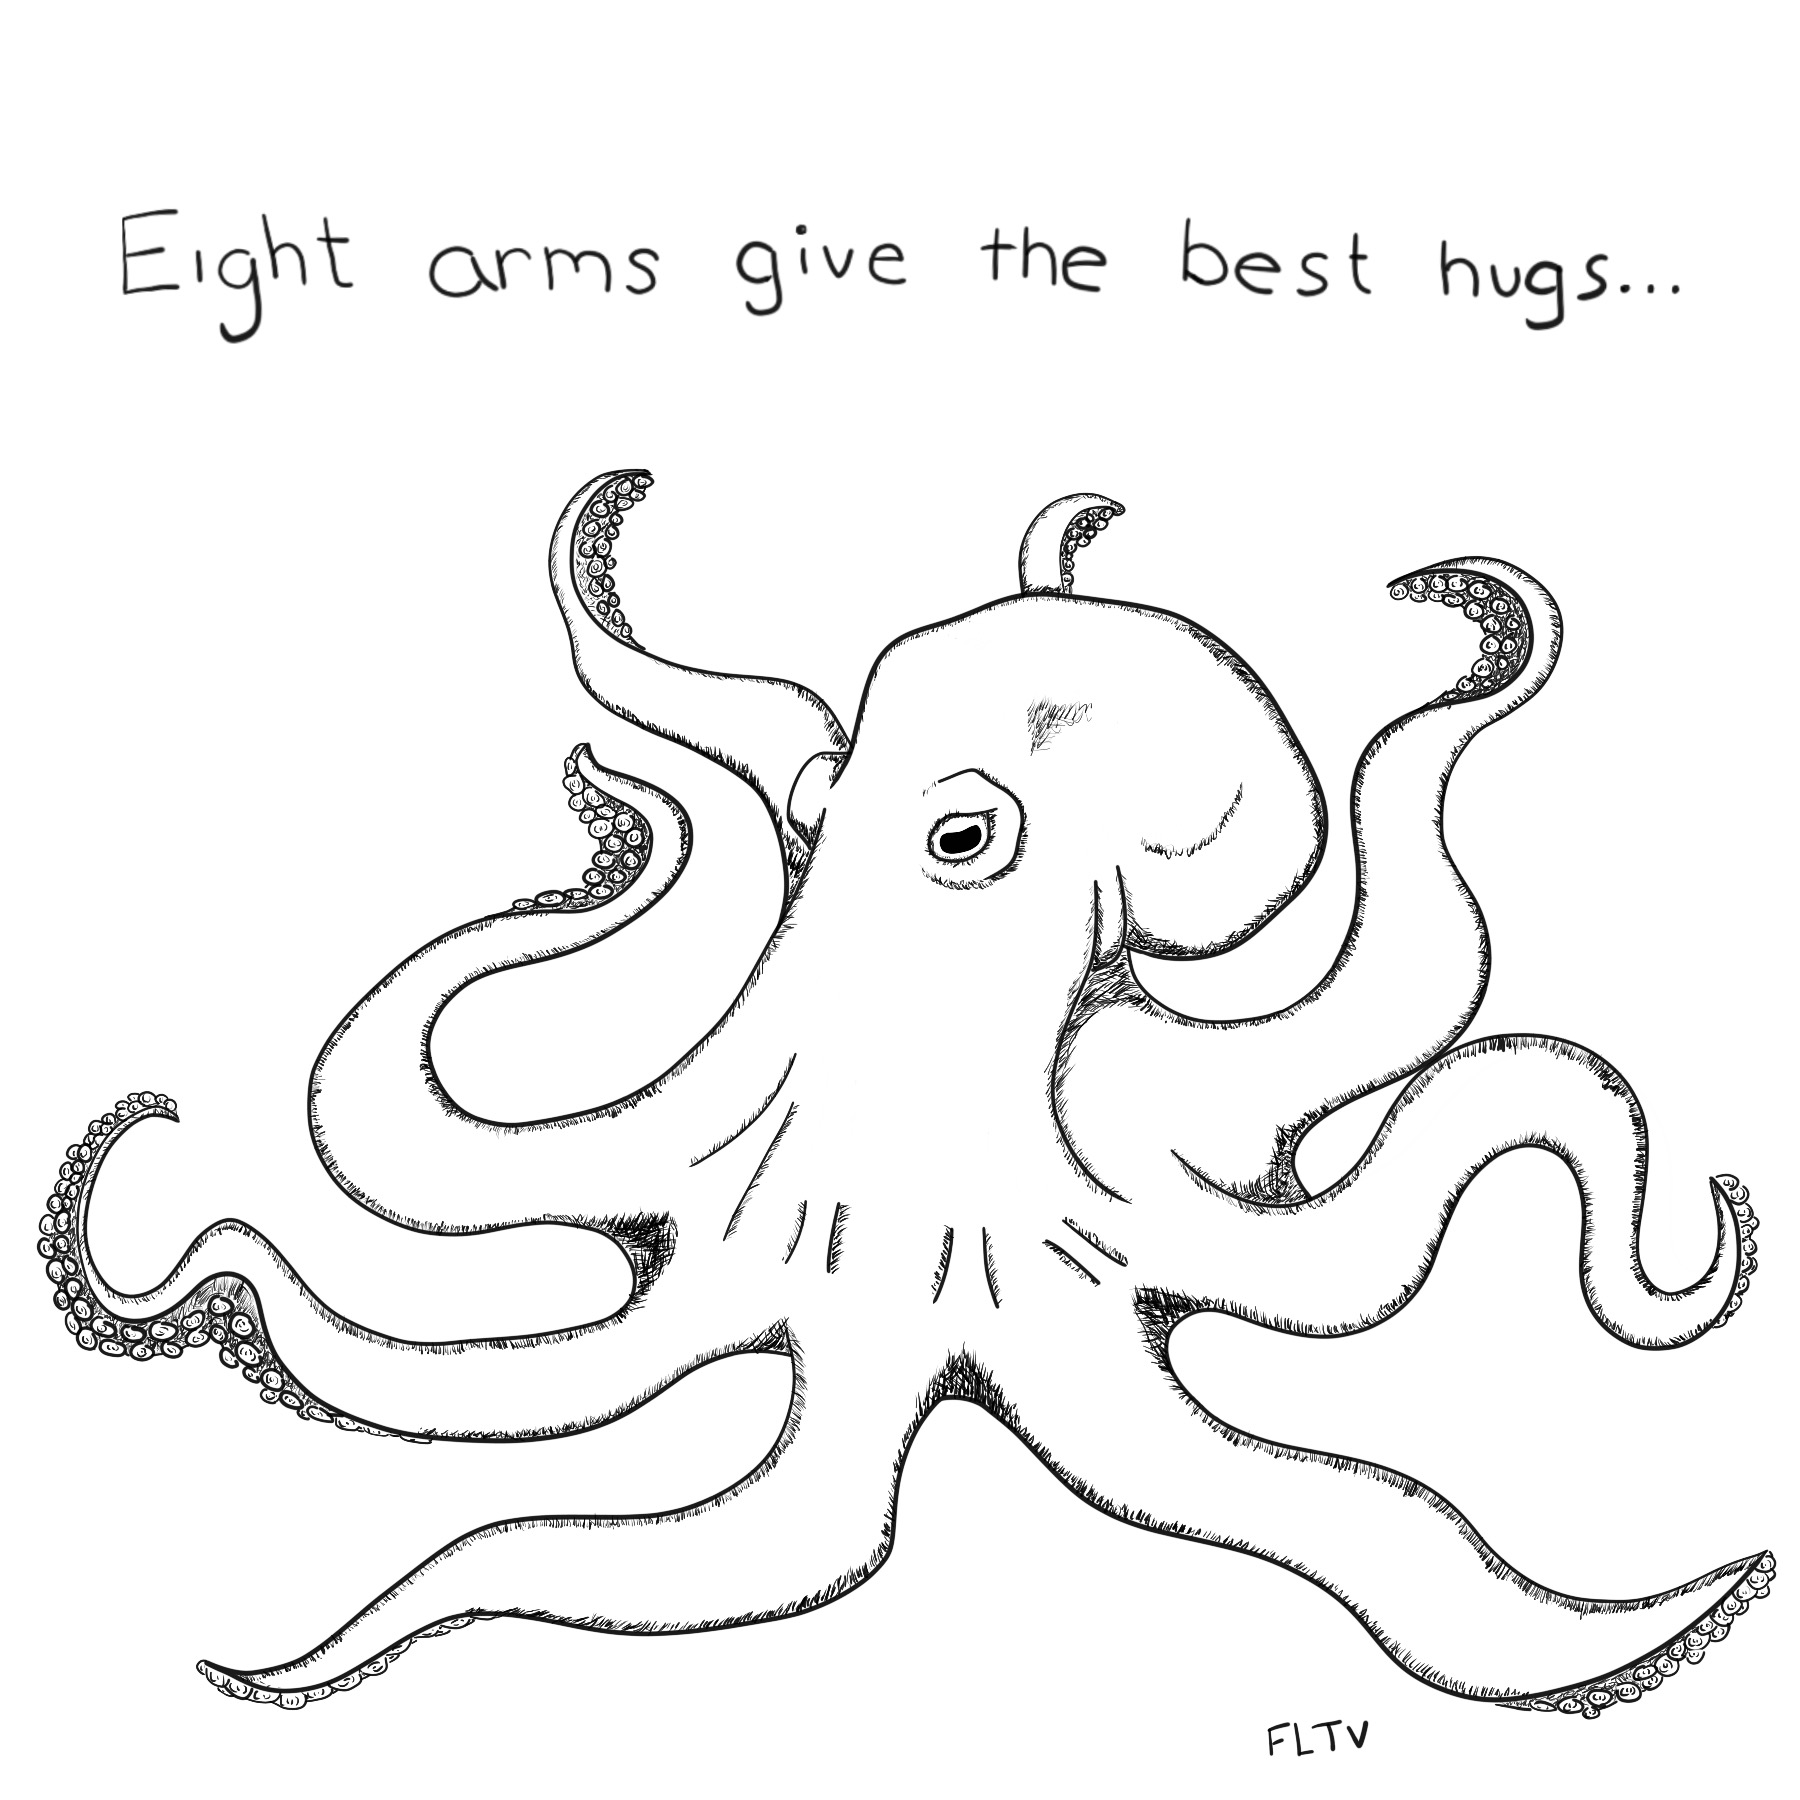 An octopus with the phrase, "Eight arms give the best hugs..." above it.